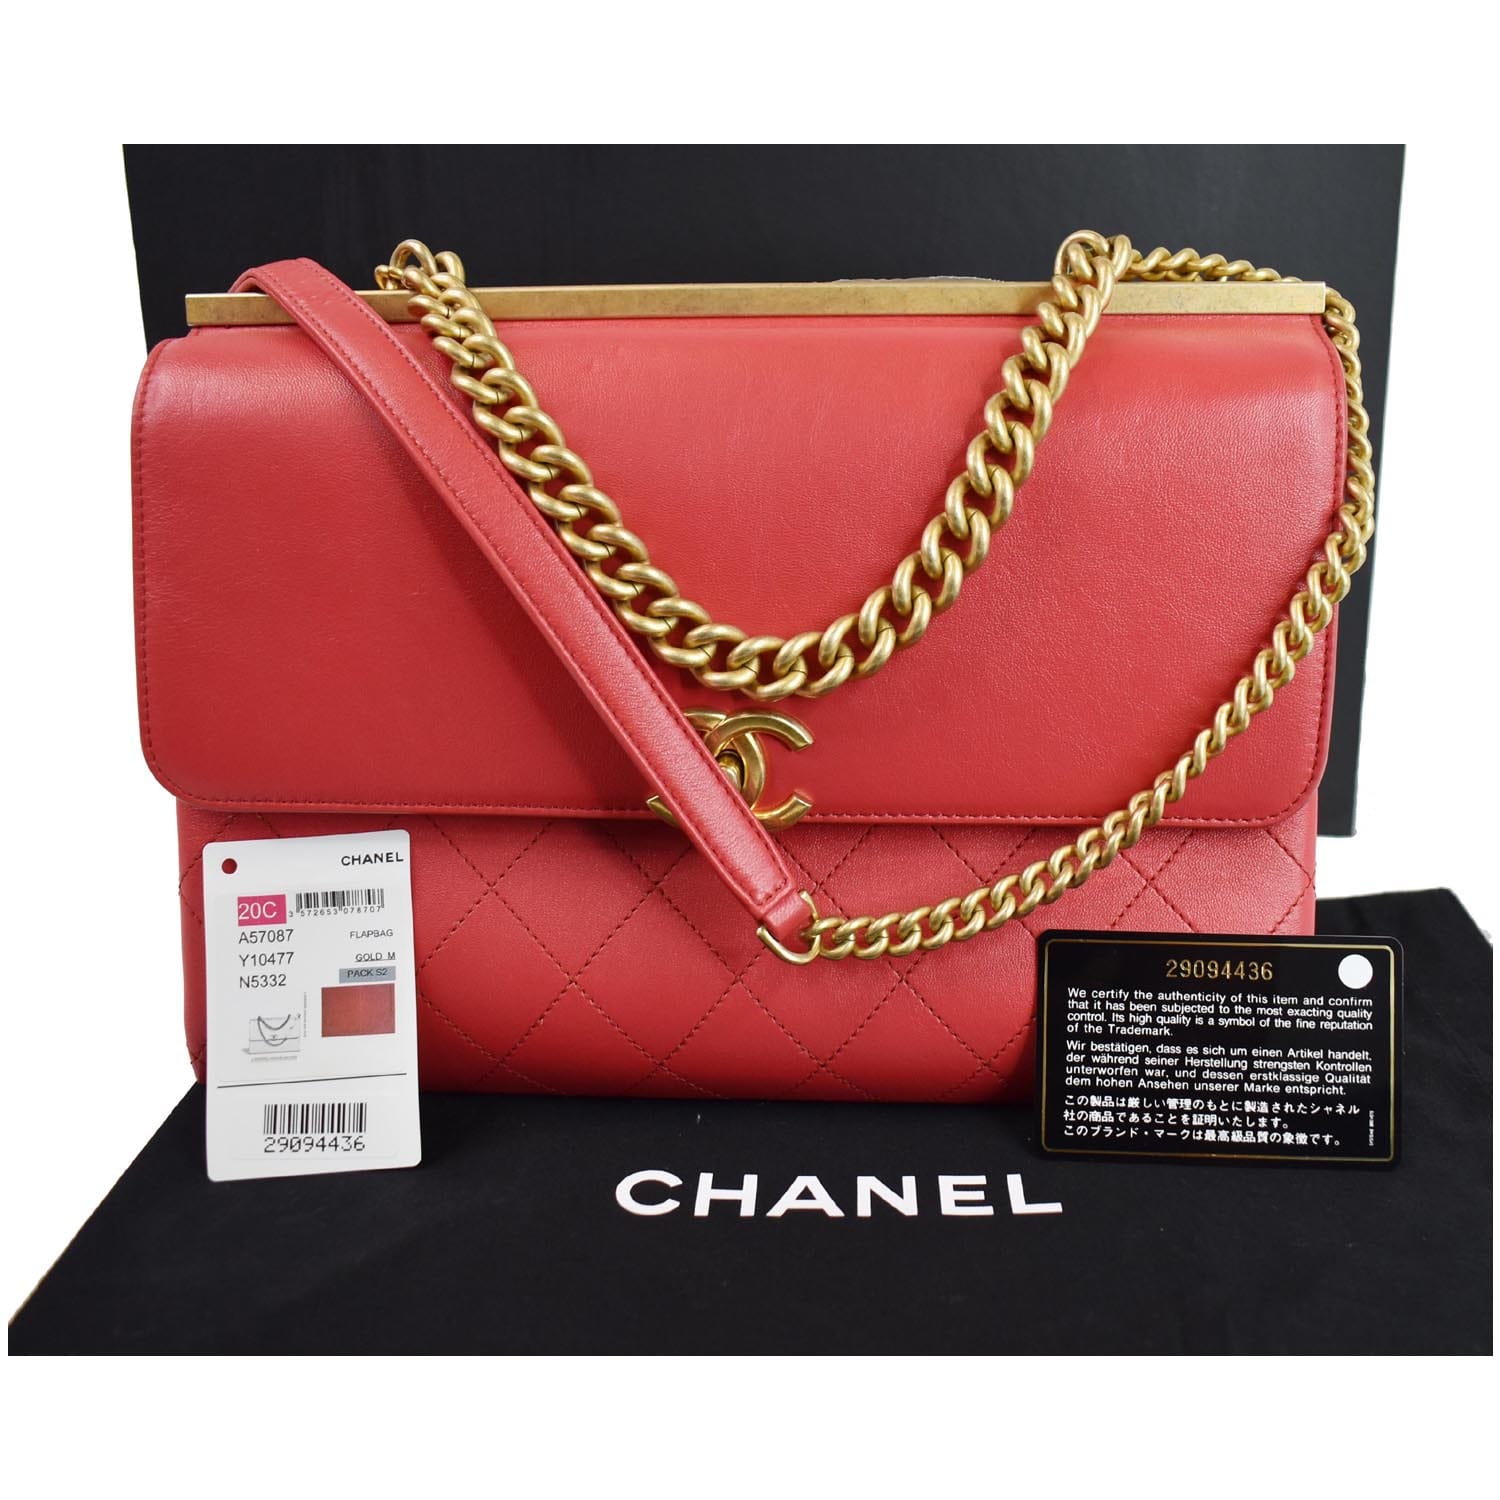 Rare Chanel 12A Red Caviar Classic Jumbo Double Flap Bag SHW